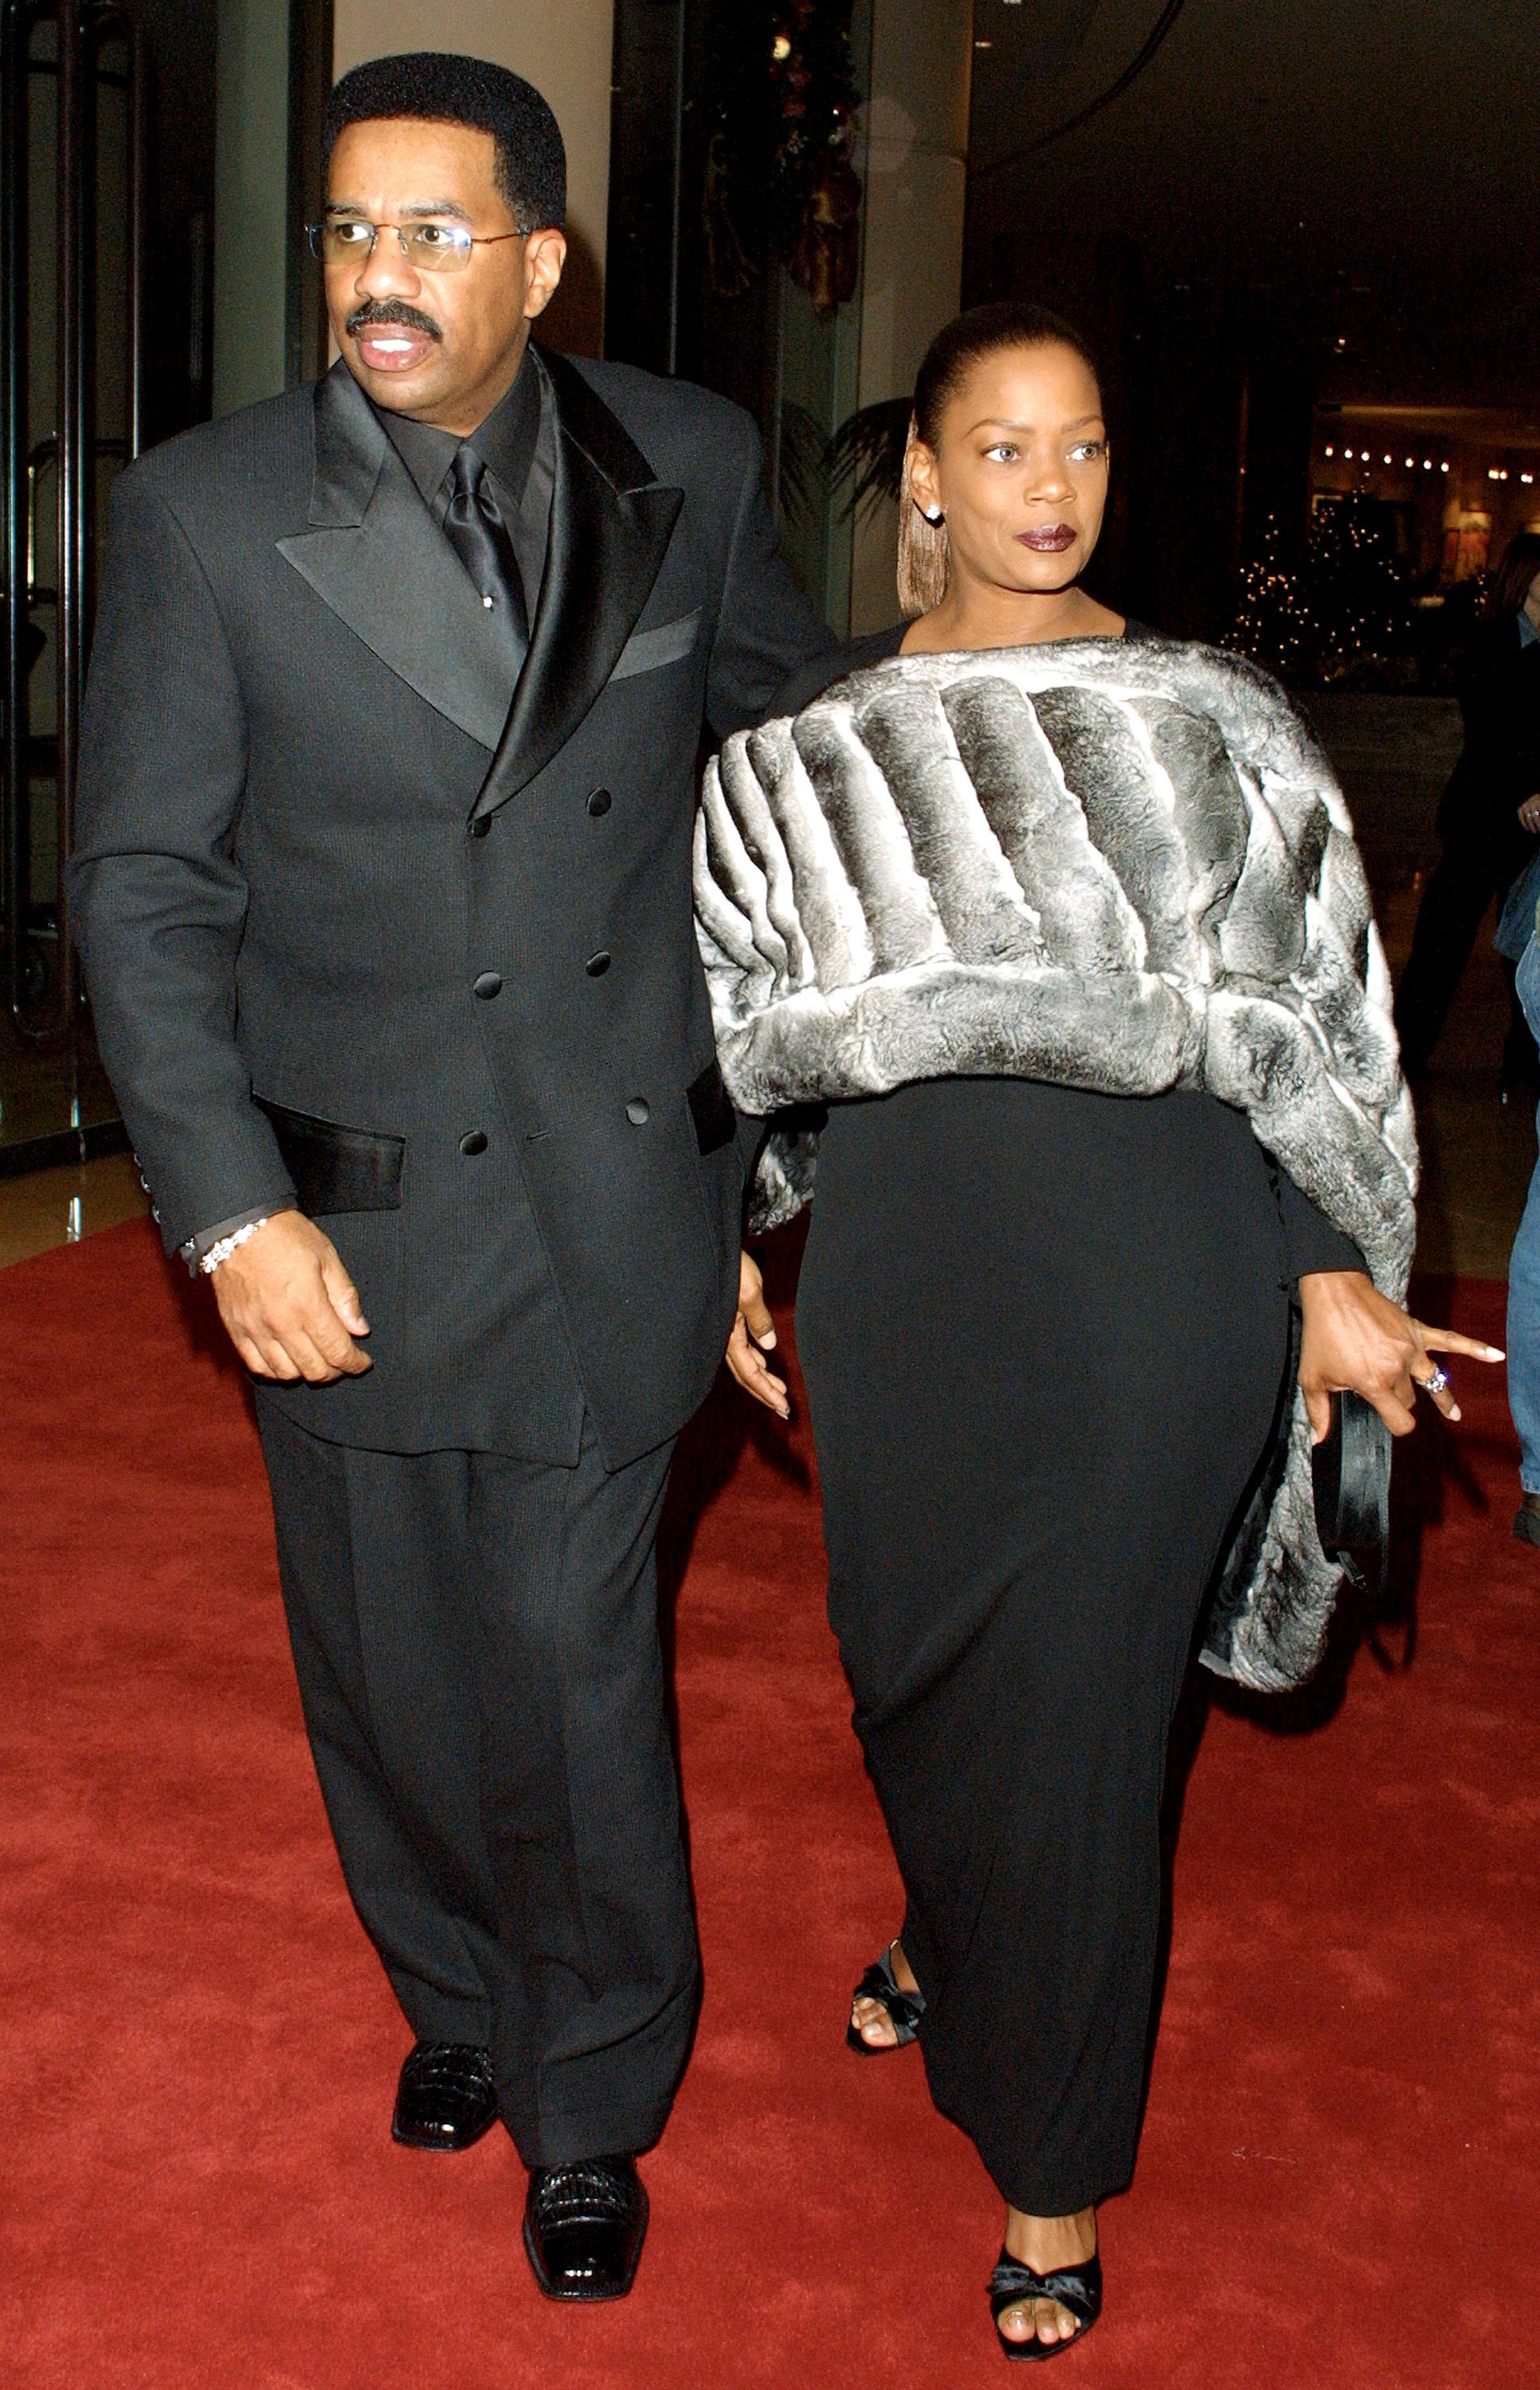 Actor/talk show host Steve Harvey and his wife Mary attend the Fourth Annual Rainbow/PUSH Coalition Awards Dinner December 11, 2001 in Beverly Hills, CA. | Source: Getty Images